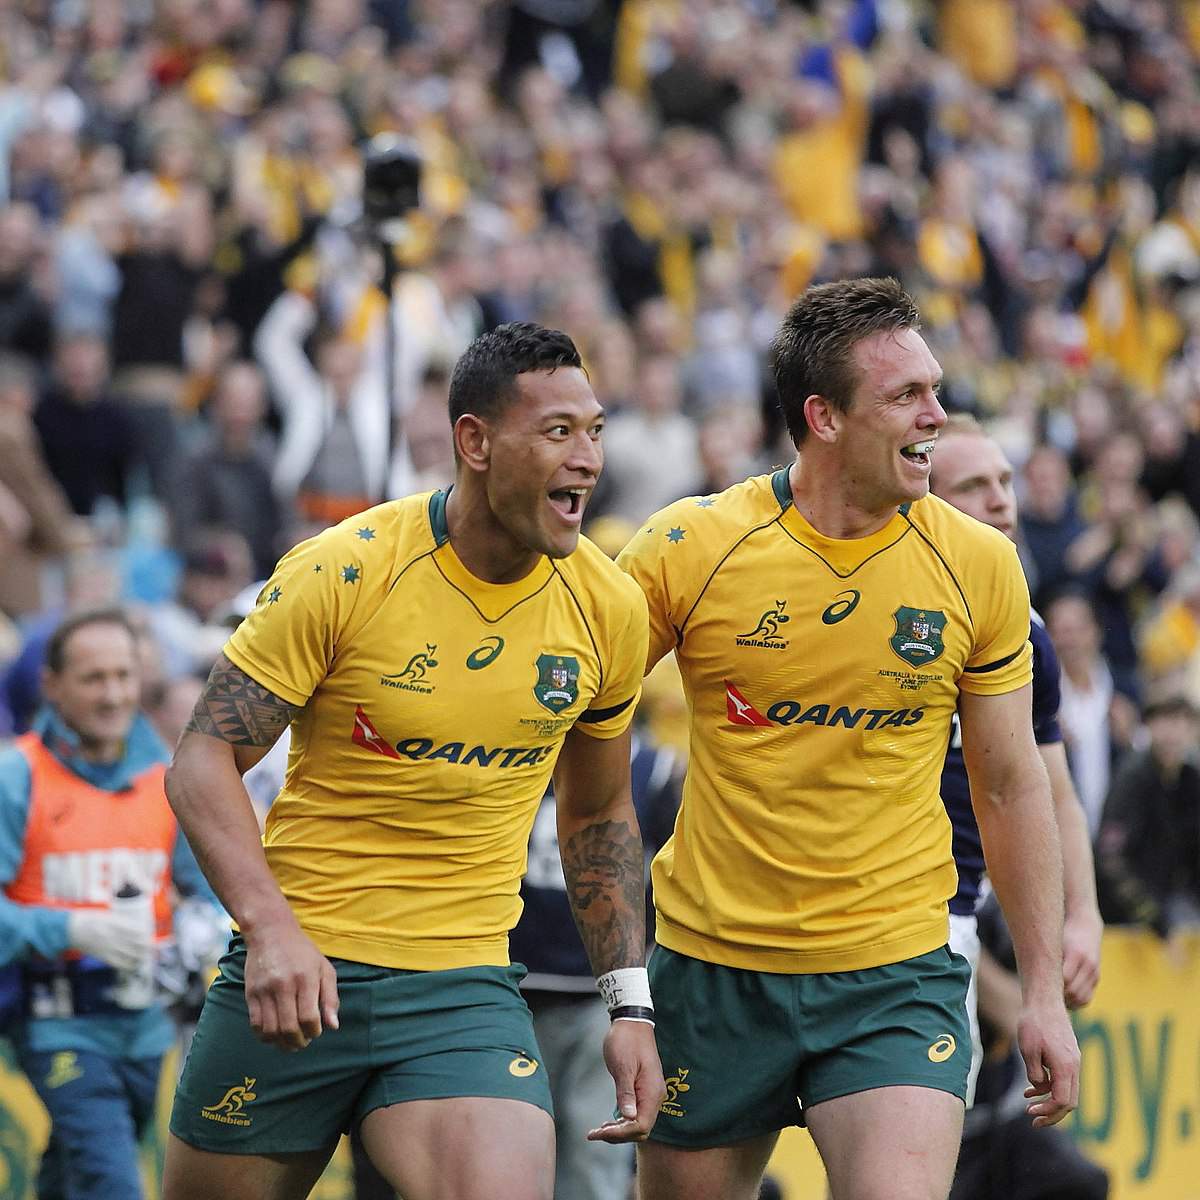 Israel Folau’s talent can’t outweigh his homophobia